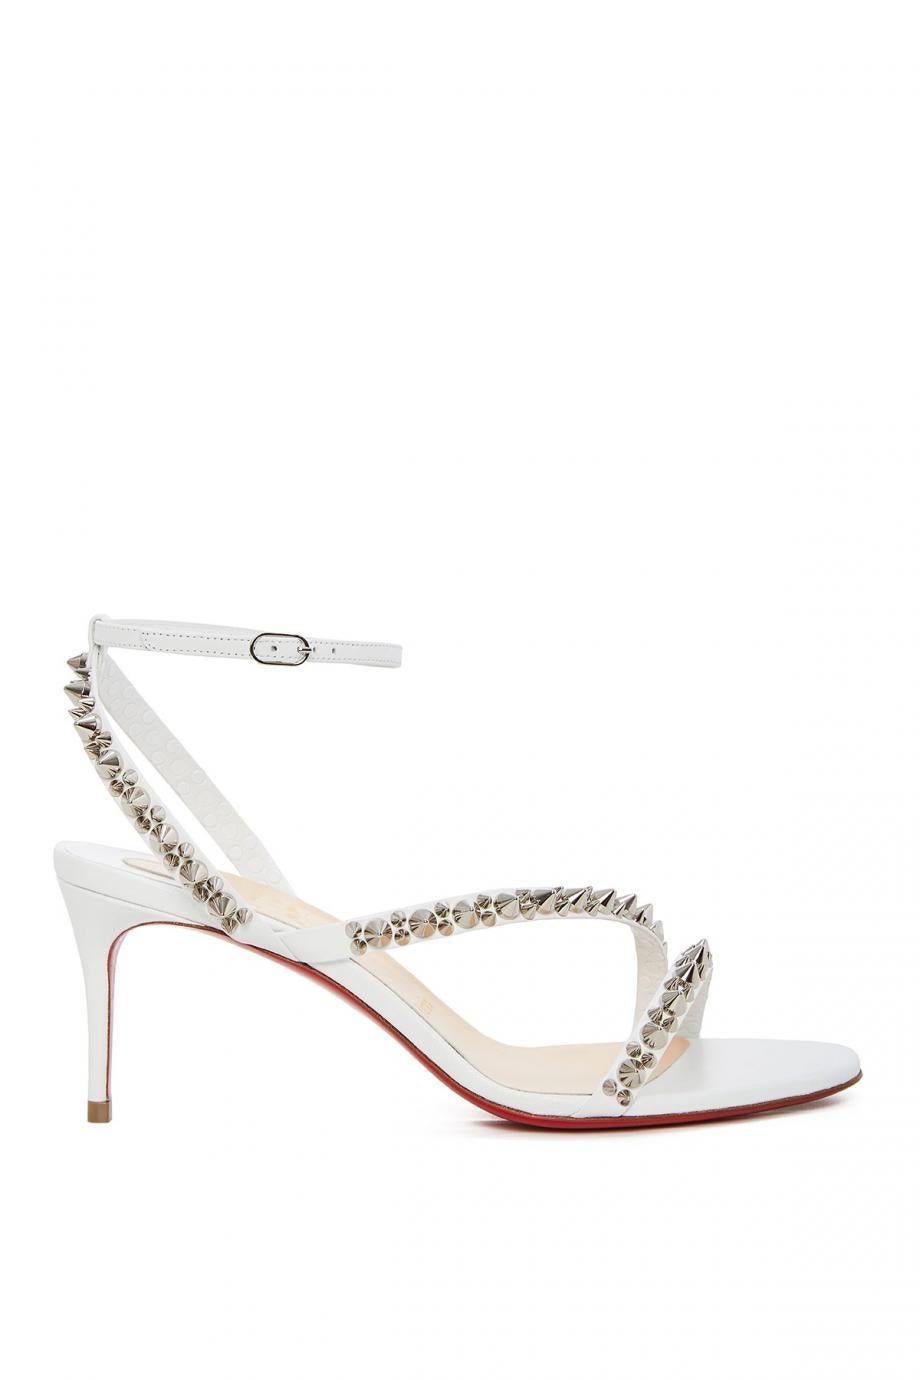 Christian Louboutin's Mafaldina Spikes sandals merge the sensual with the rebellious. Comprised of barely-there leather straps with tough-luxe studs, they're complete with soles dipped in house-signature red lacquer. Modest 70mm heels make for